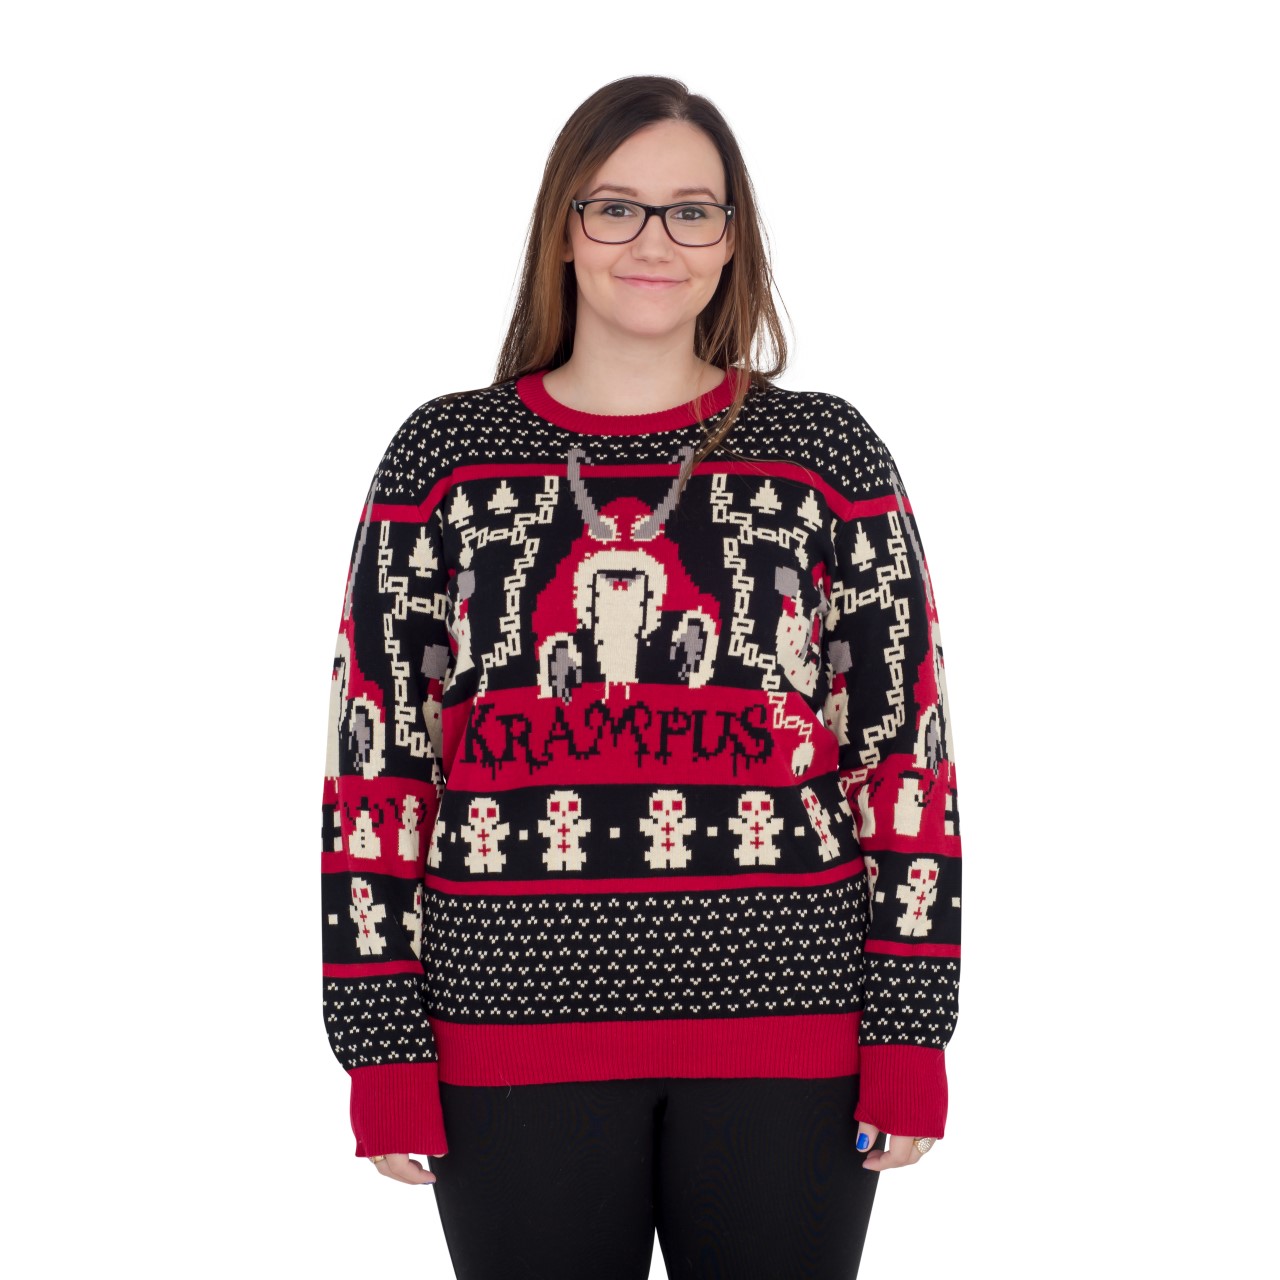 Women’s Krampus Knit Ugly Christmas Sweater,New Products : uglyschristmassweater.com